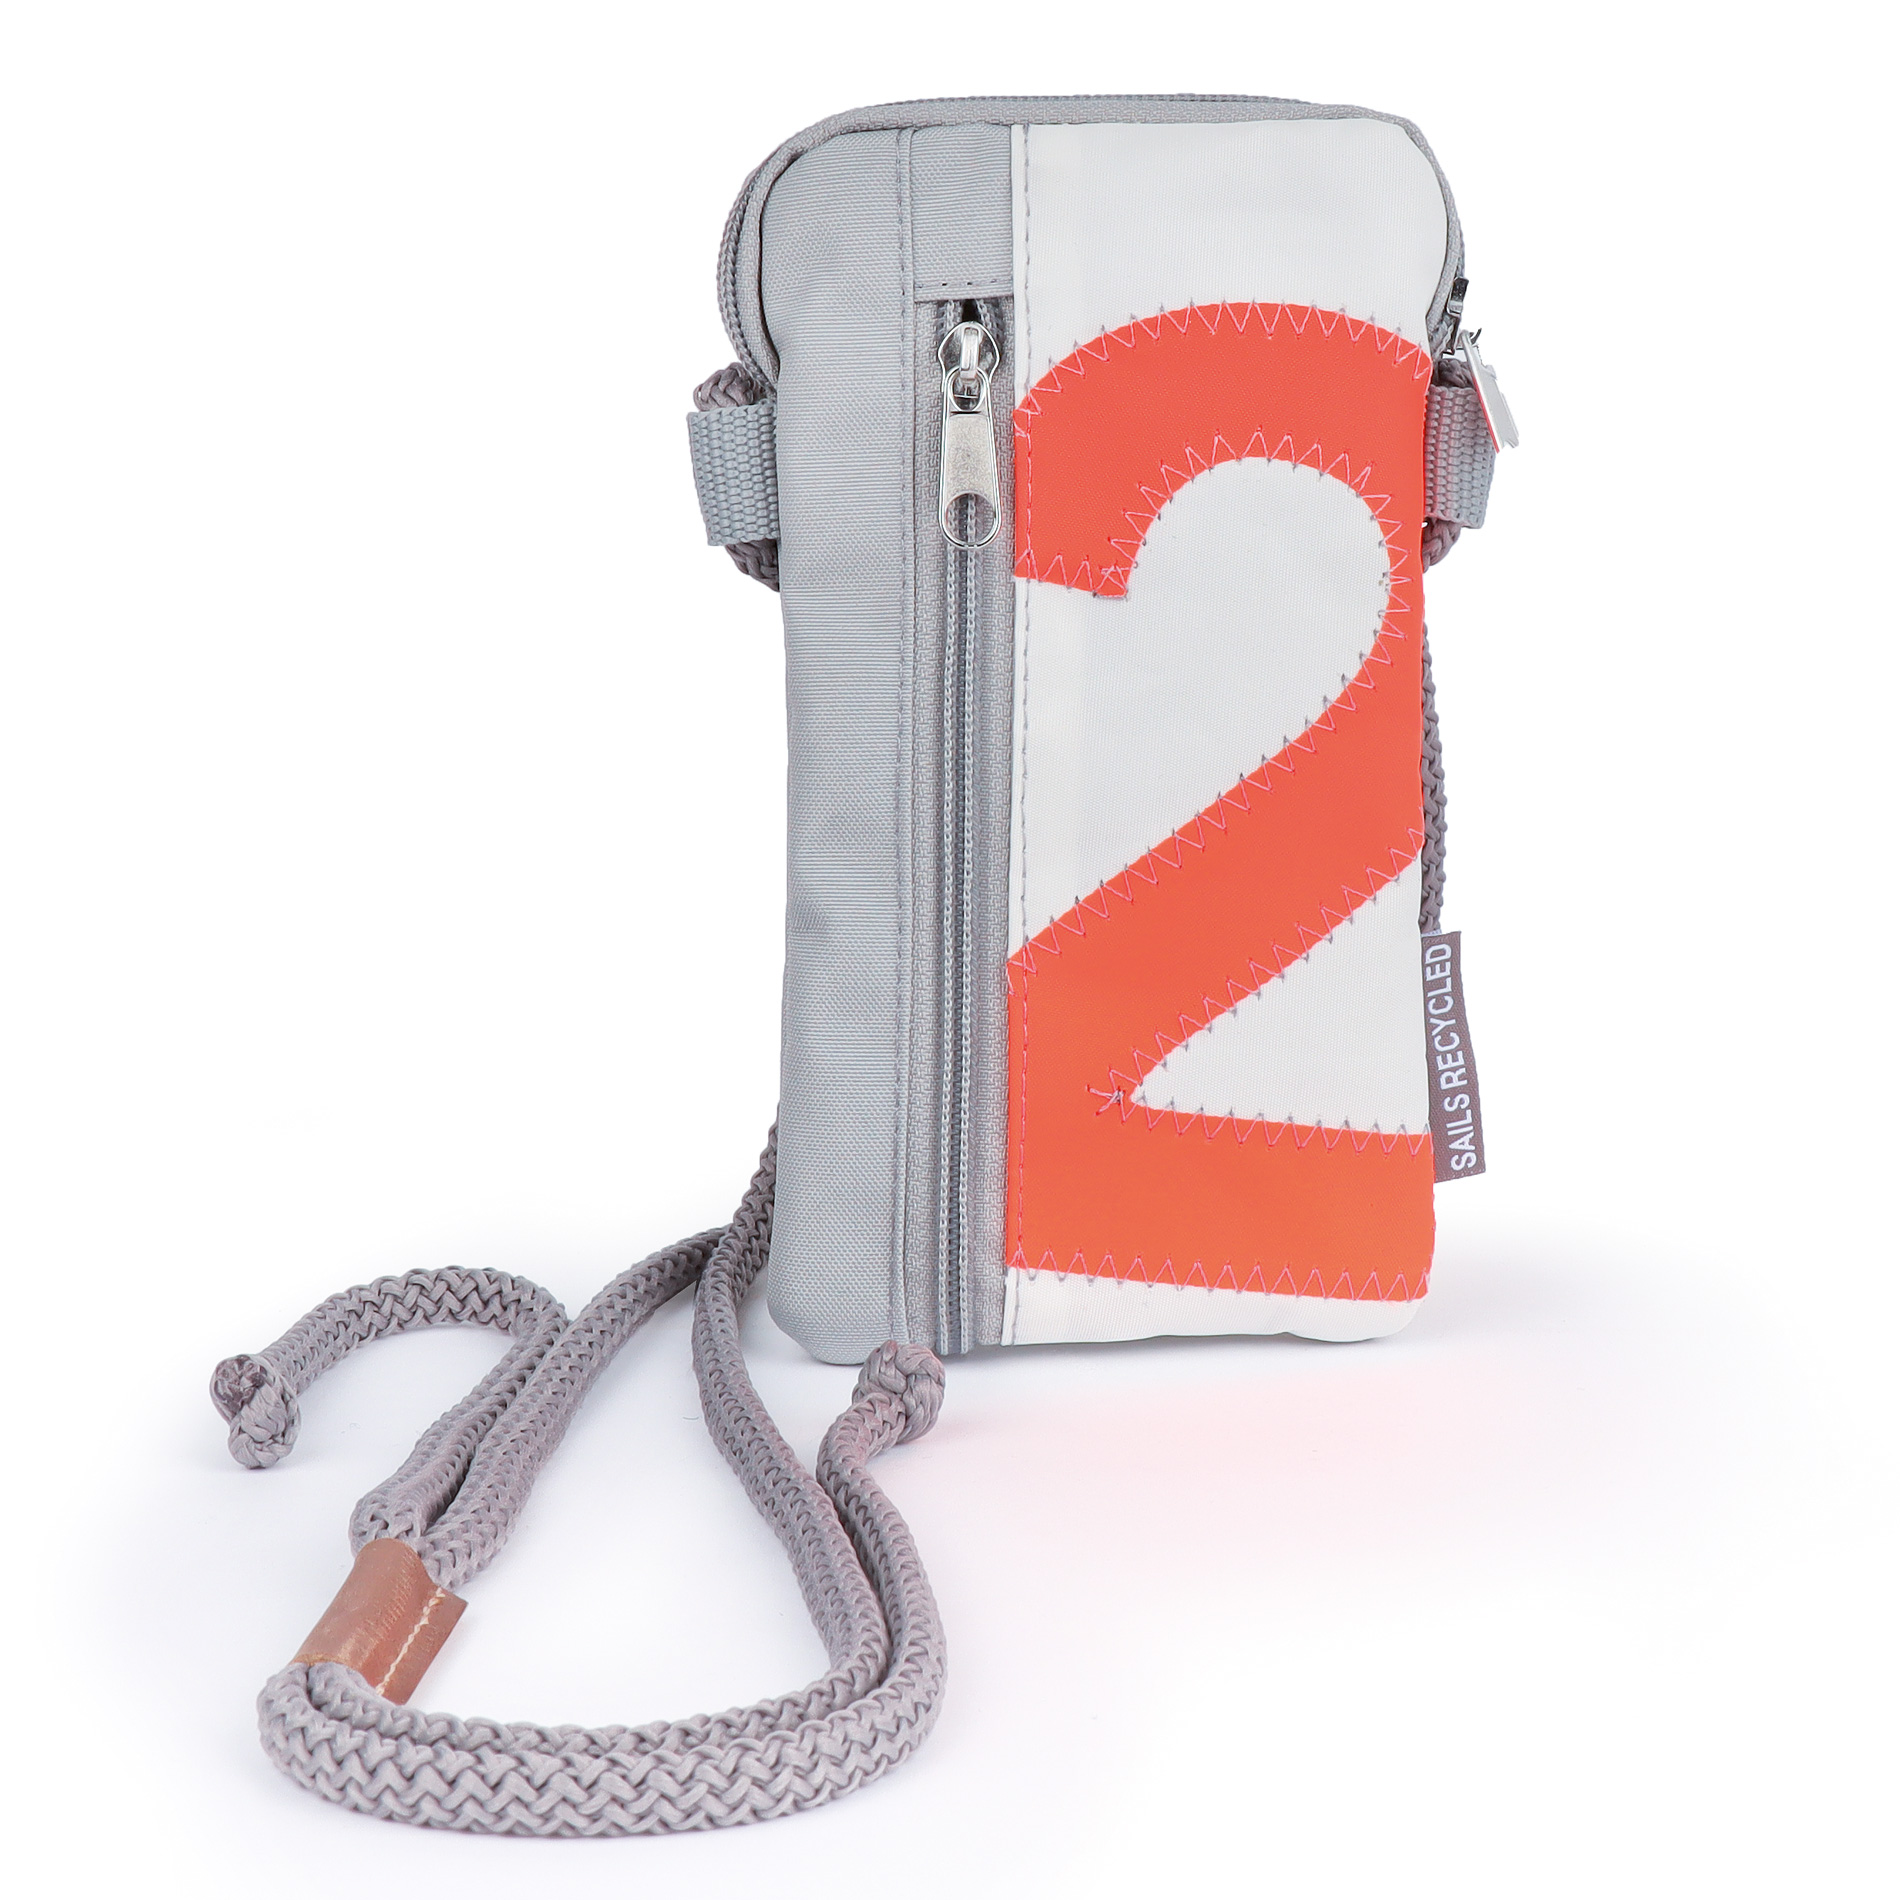 Nautk Lütt - mobile phone bag made from recycled Sailcloth